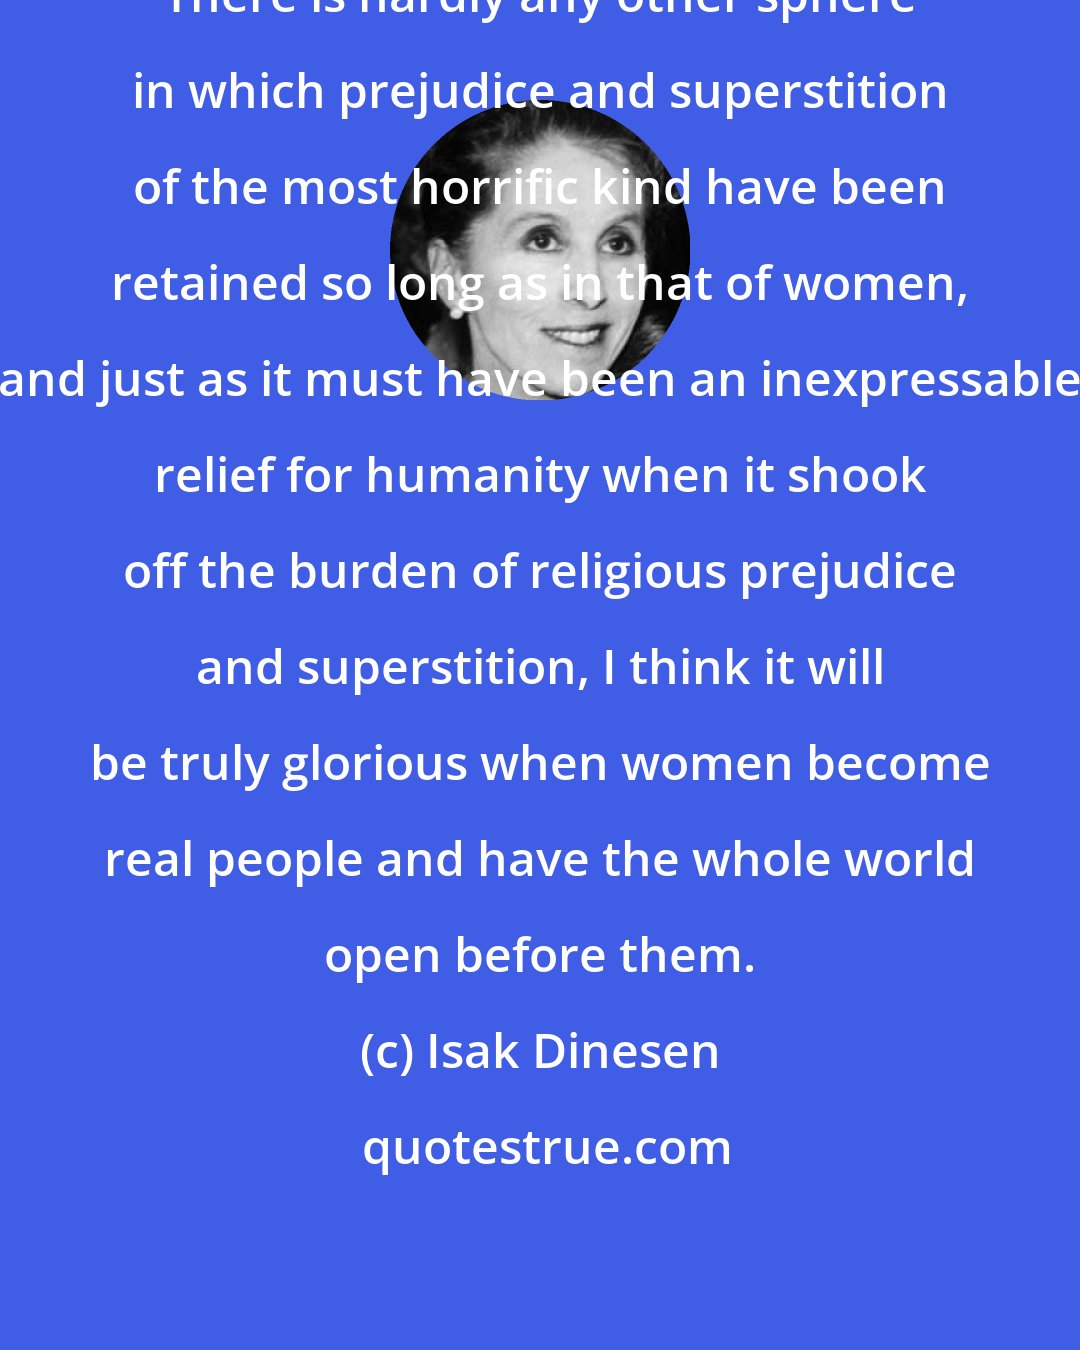 Isak Dinesen: There is hardly any other sphere in which prejudice and superstition of the most horrific kind have been retained so long as in that of women, and just as it must have been an inexpressable relief for humanity when it shook off the burden of religious prejudice and superstition, I think it will be truly glorious when women become real people and have the whole world open before them.